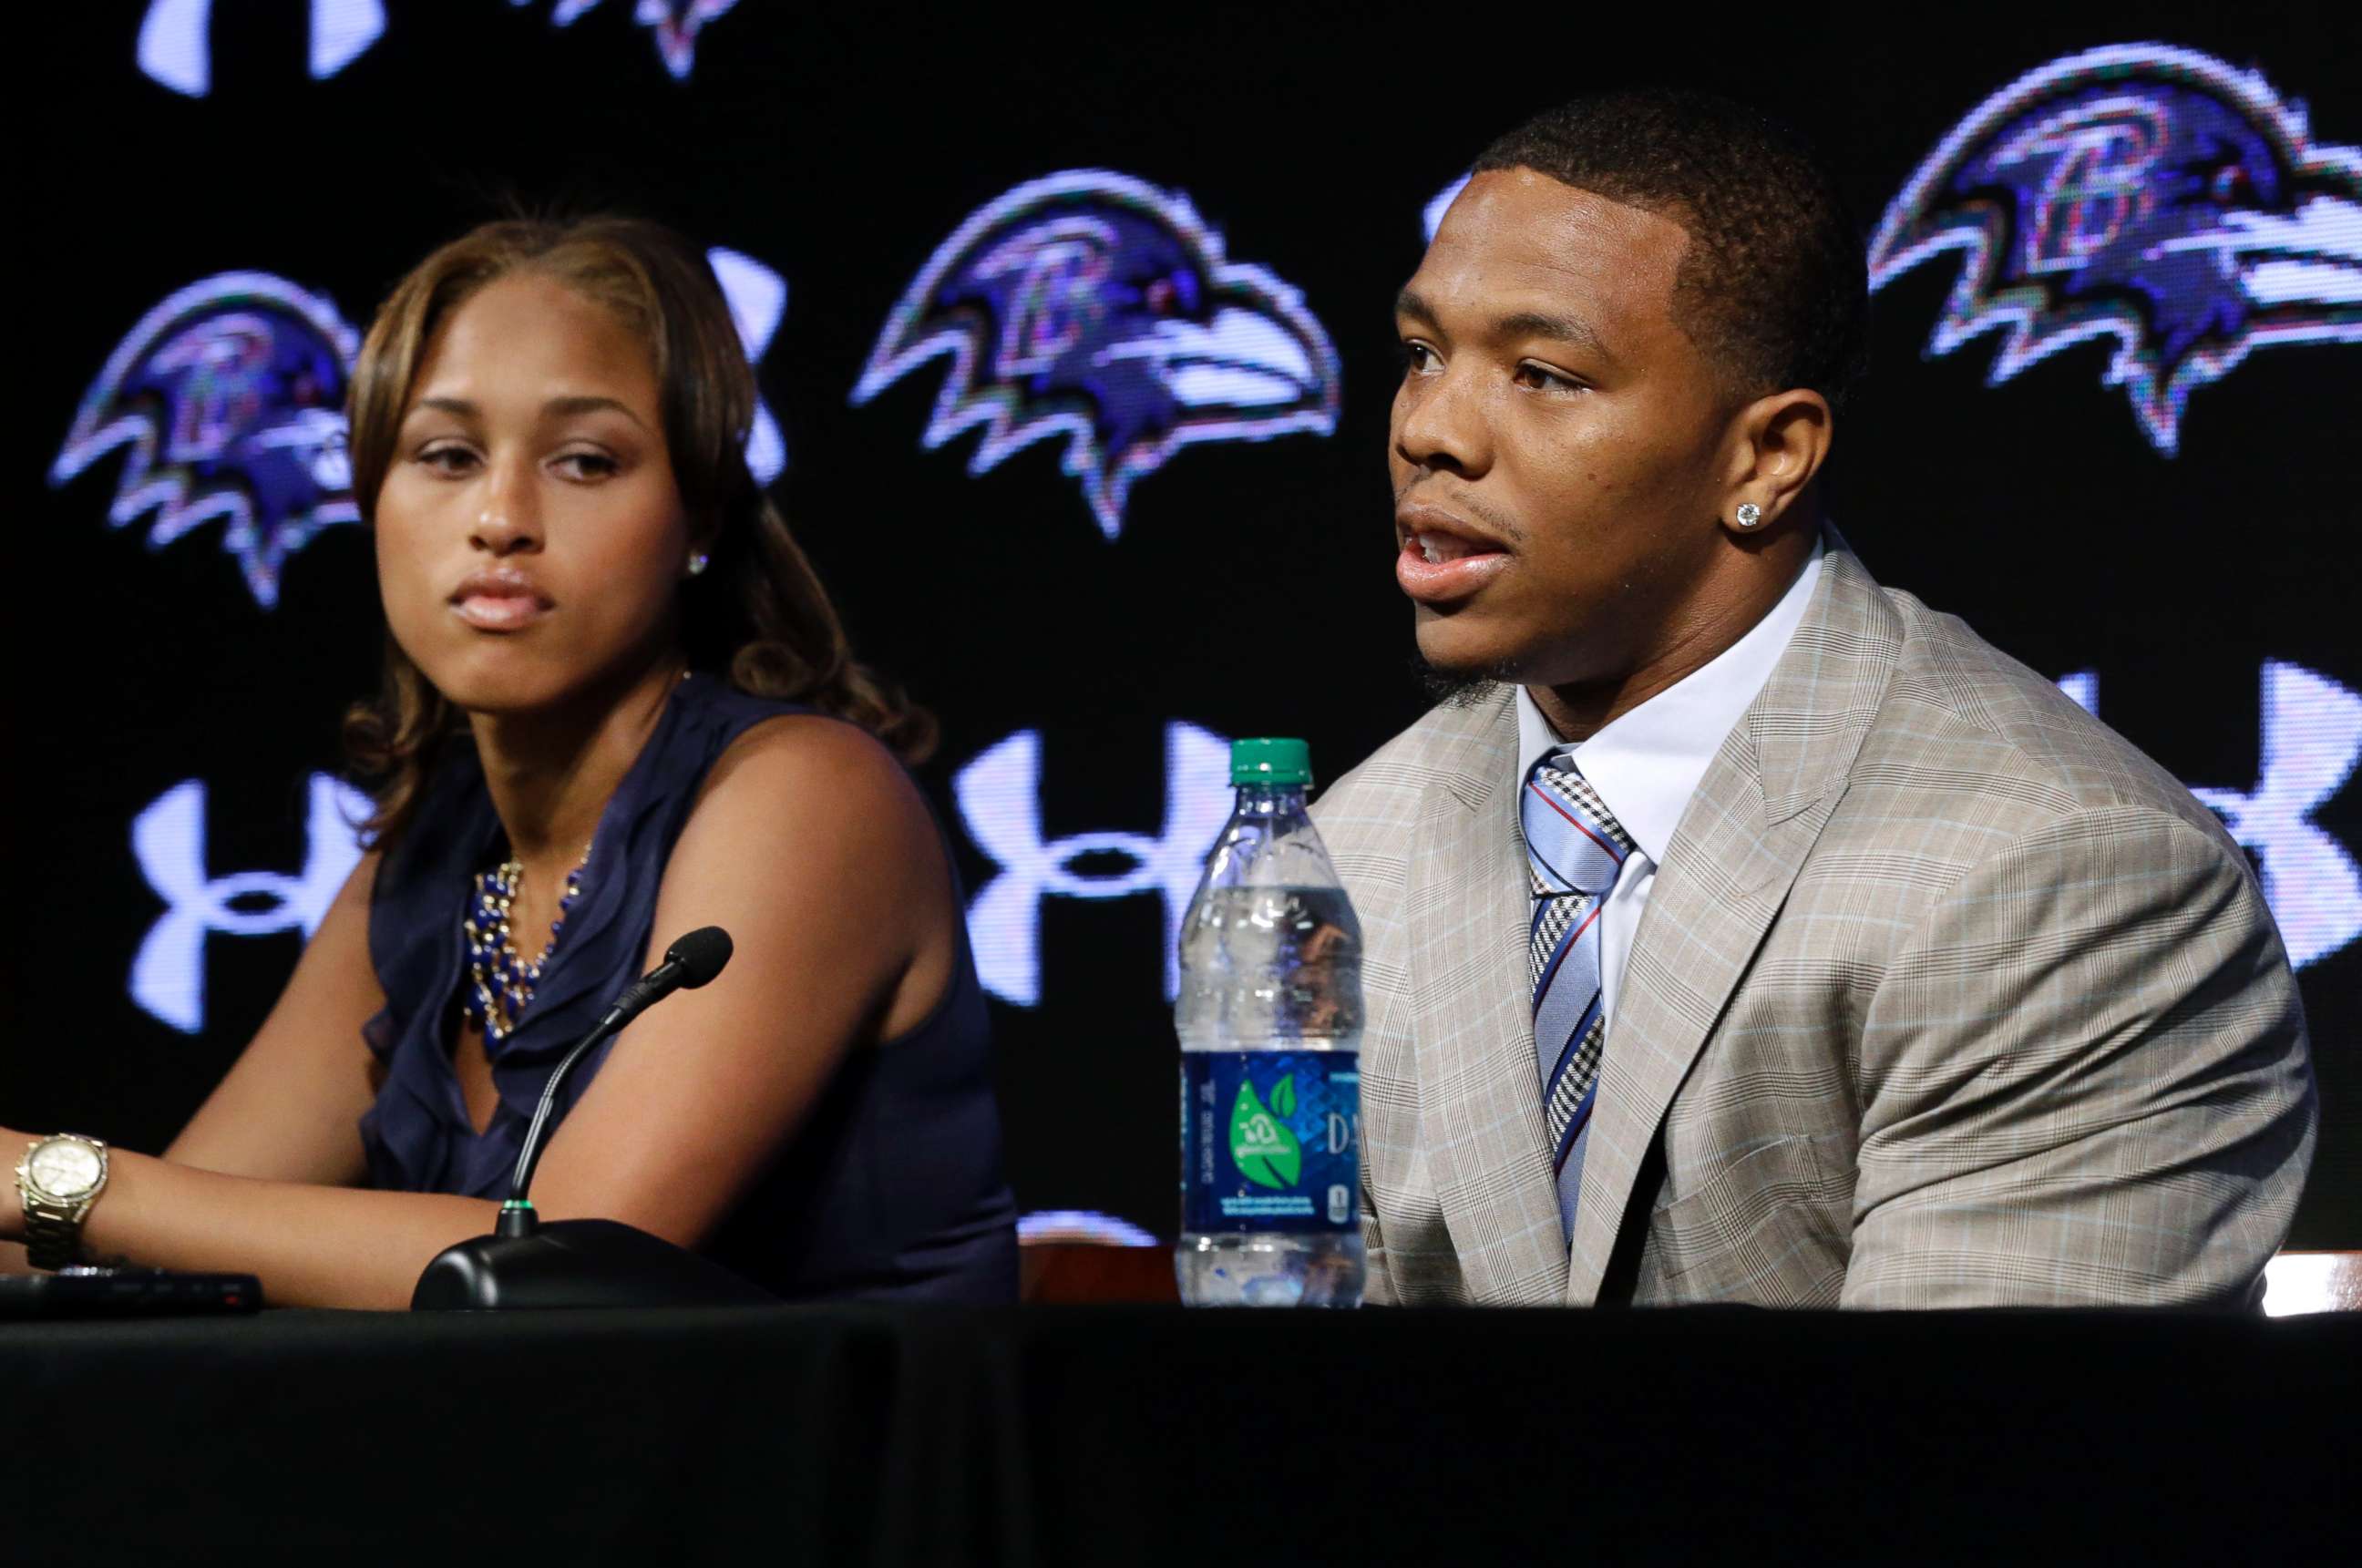 PHOTO: In this May 23, 2014, file photo, Baltimore Ravens running back Ray Rice, right, speaks alongside his wife, Janay, during a news conference at the team's practice facility in Owings Mills, Md. 